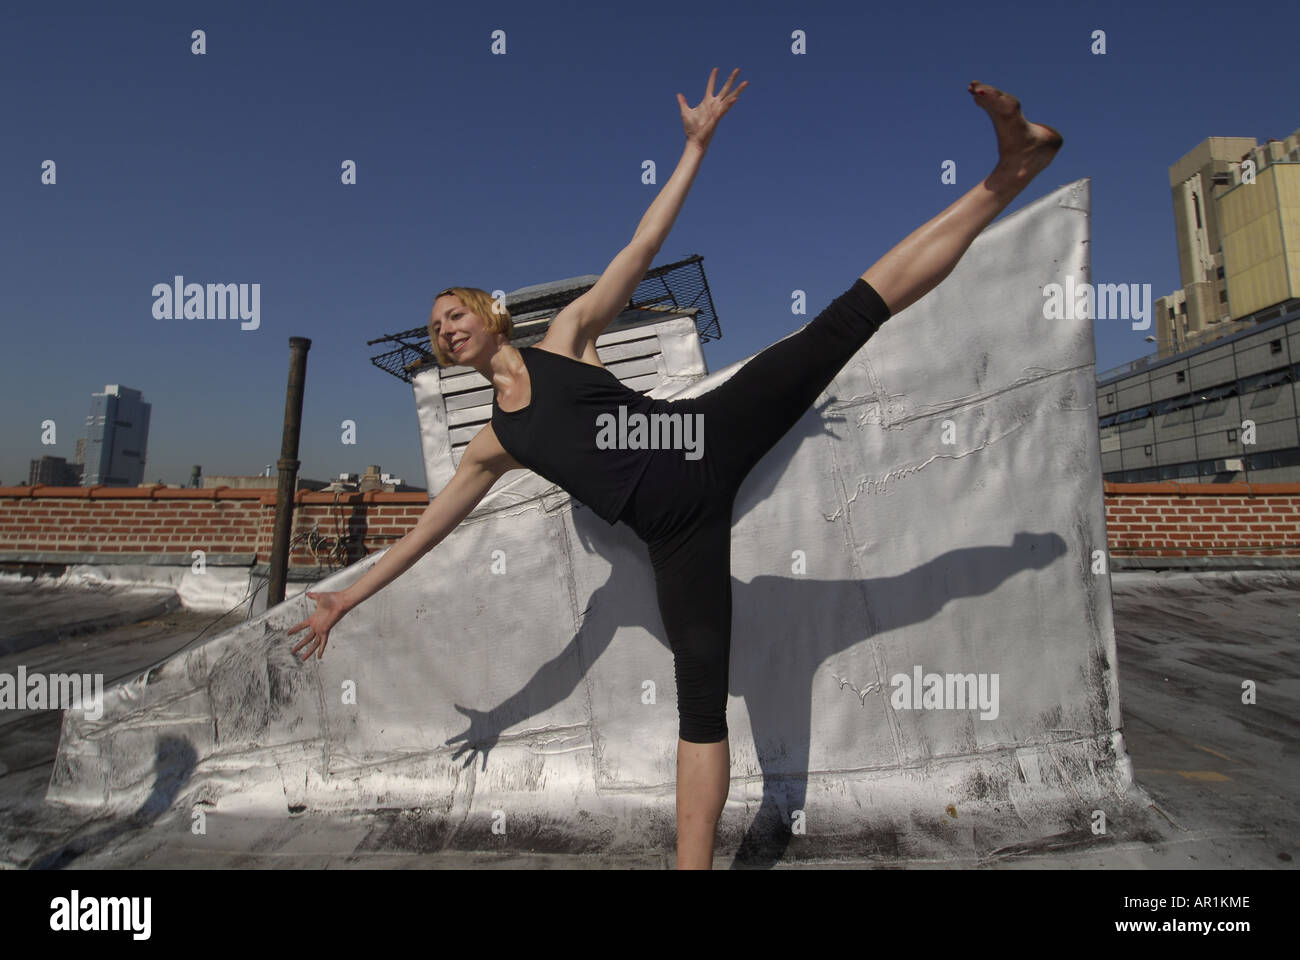 Model released New York CIty Thirty years old blond woman dancing on a building roof in a sunny morning in mid town Manhattan exercise healthy athletic strech strenching strong fit American health cardiac vascular lifestyle move movement power yogi twist mujer americana rubia ejercicio sana nueva y ork movimiento estiramiento salud medicina estilo de vida feliz saludable fuerte Stock Photo